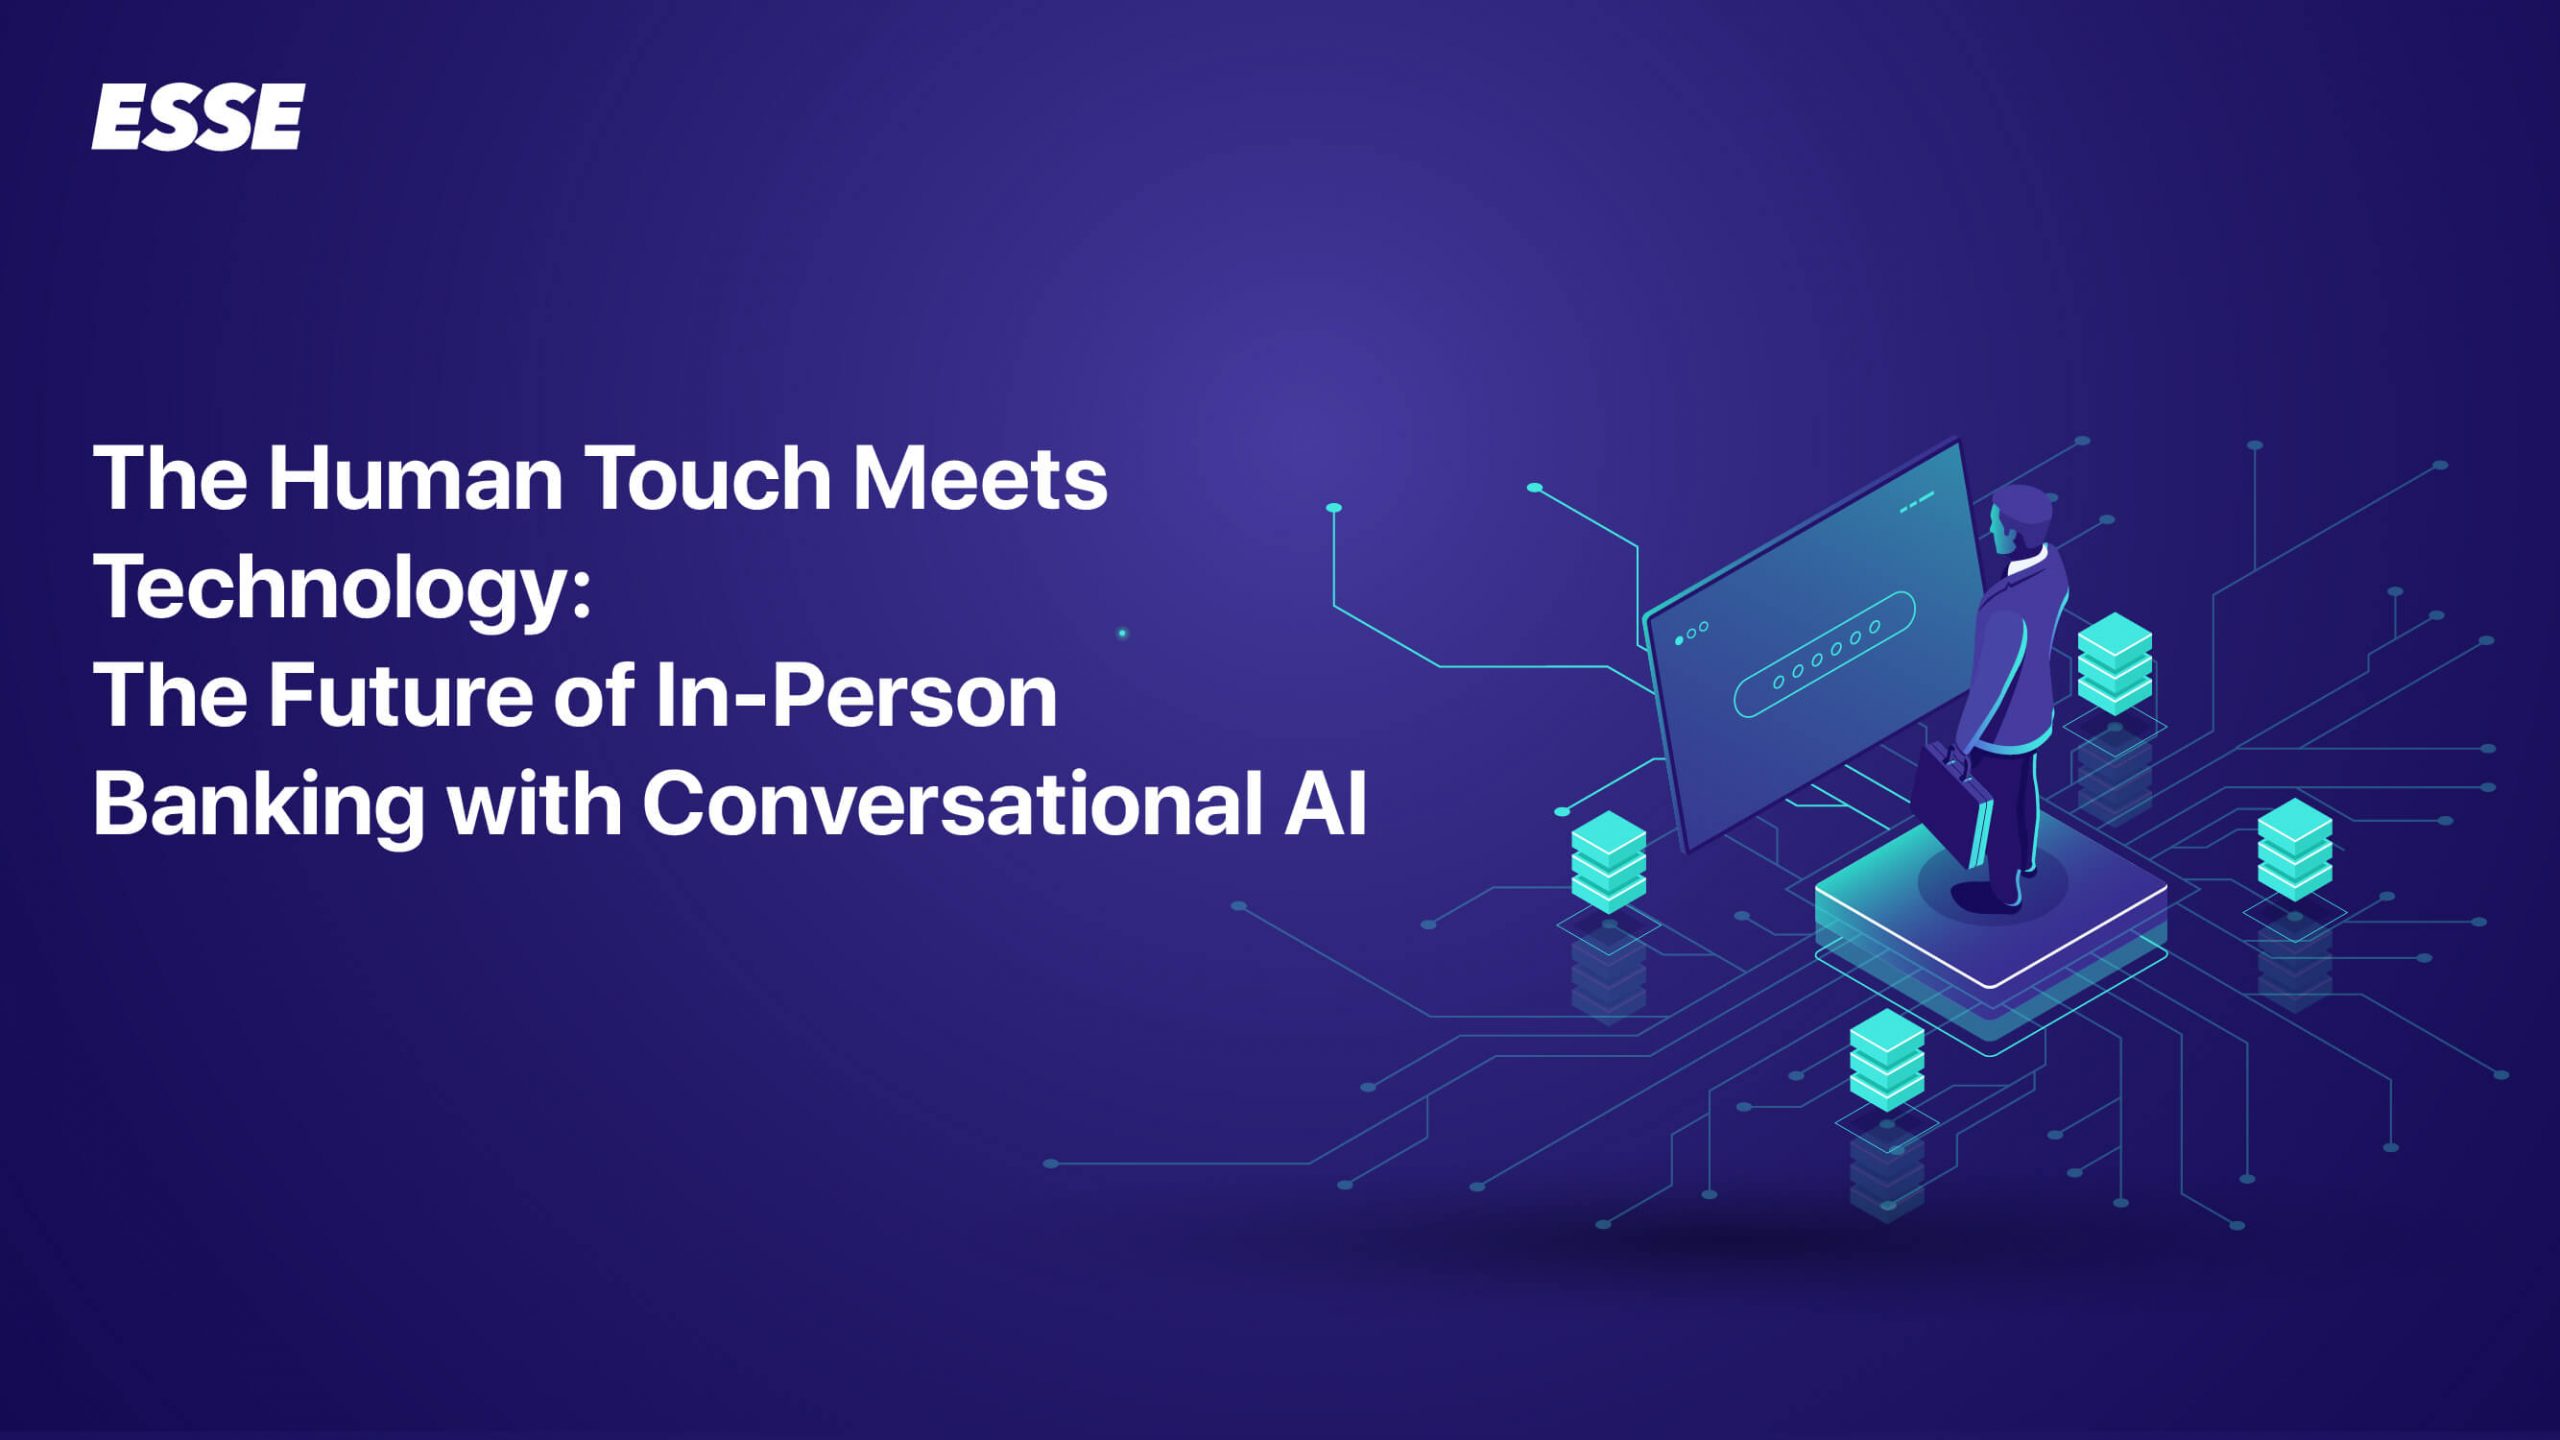 The Human Touch Meets Technology: The Future of In-Person Banking with Conversational AI